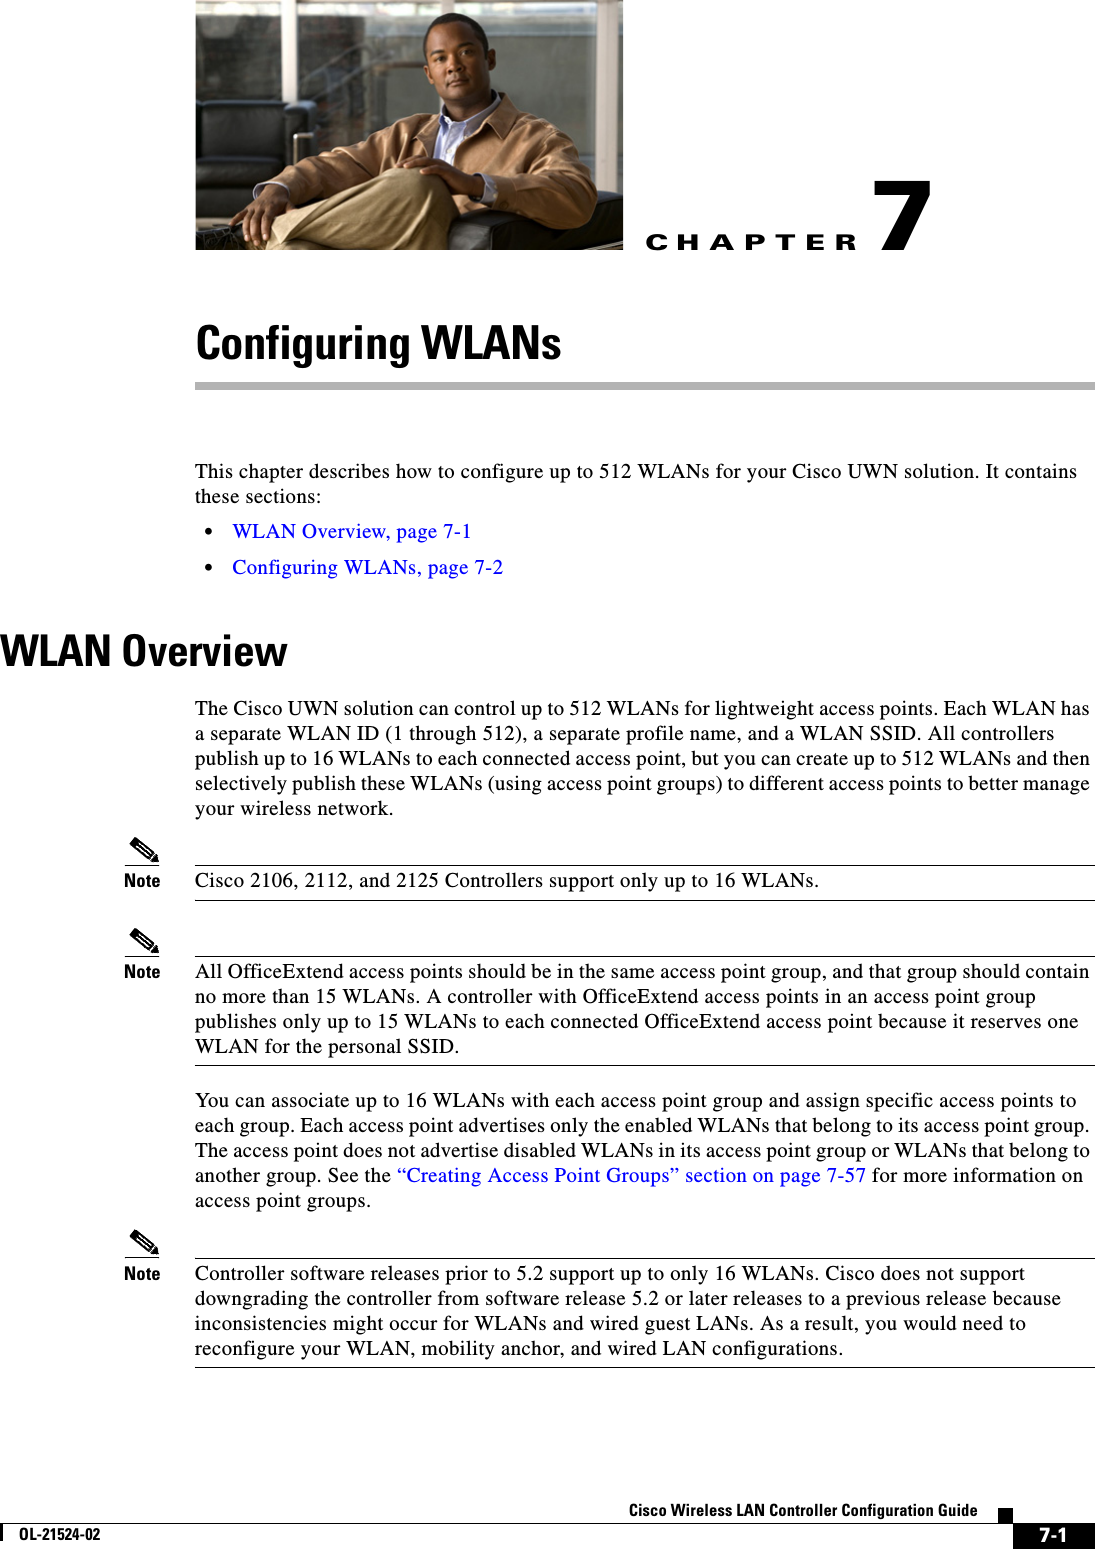 CHAPTER7-1Cisco Wireless LAN Controller Configuration GuideOL-21524-027Configuring WLANsThis chapter describes how to configure up to 512 WLANs for your Cisco UWN solution. It contains these sections:  • WLAN Overview, page 7-1  • Configuring WLANs, page 7-2WLAN OverviewThe Cisco UWN solution can control up to 512 WLANs for lightweight access points. Each WLAN has a separate WLAN ID (1 through 512), a separate profile name, and a WLAN SSID. All controllers publish up to 16 WLANs to each connected access point, but you can create up to 512 WLANs and then selectively publish these WLANs (using access point groups) to different access points to better manage your wireless network.Note Cisco 2106, 2112, and 2125 Controllers support only up to 16 WLANs.Note All OfficeExtend access points should be in the same access point group, and that group should contain no more than 15 WLANs. A controller with OfficeExtend access points in an access point group publishes only up to 15 WLANs to each connected OfficeExtend access point because it reserves one WLAN for the personal SSID.You can associate up to 16 WLANs with each access point group and assign specific access points to each group. Each access point advertises only the enabled WLANs that belong to its access point group. The access point does not advertise disabled WLANs in its access point group or WLANs that belong to another group. See the “Creating Access Point Groups” section on page 7-57 for more information on access point groups.Note Controller software releases prior to 5.2 support up to only 16 WLANs. Cisco does not support downgrading the controller from software release 5.2 or later releases to a previous release because inconsistencies might occur for WLANs and wired guest LANs. As a result, you would need to reconfigure your WLAN, mobility anchor, and wired LAN configurations.